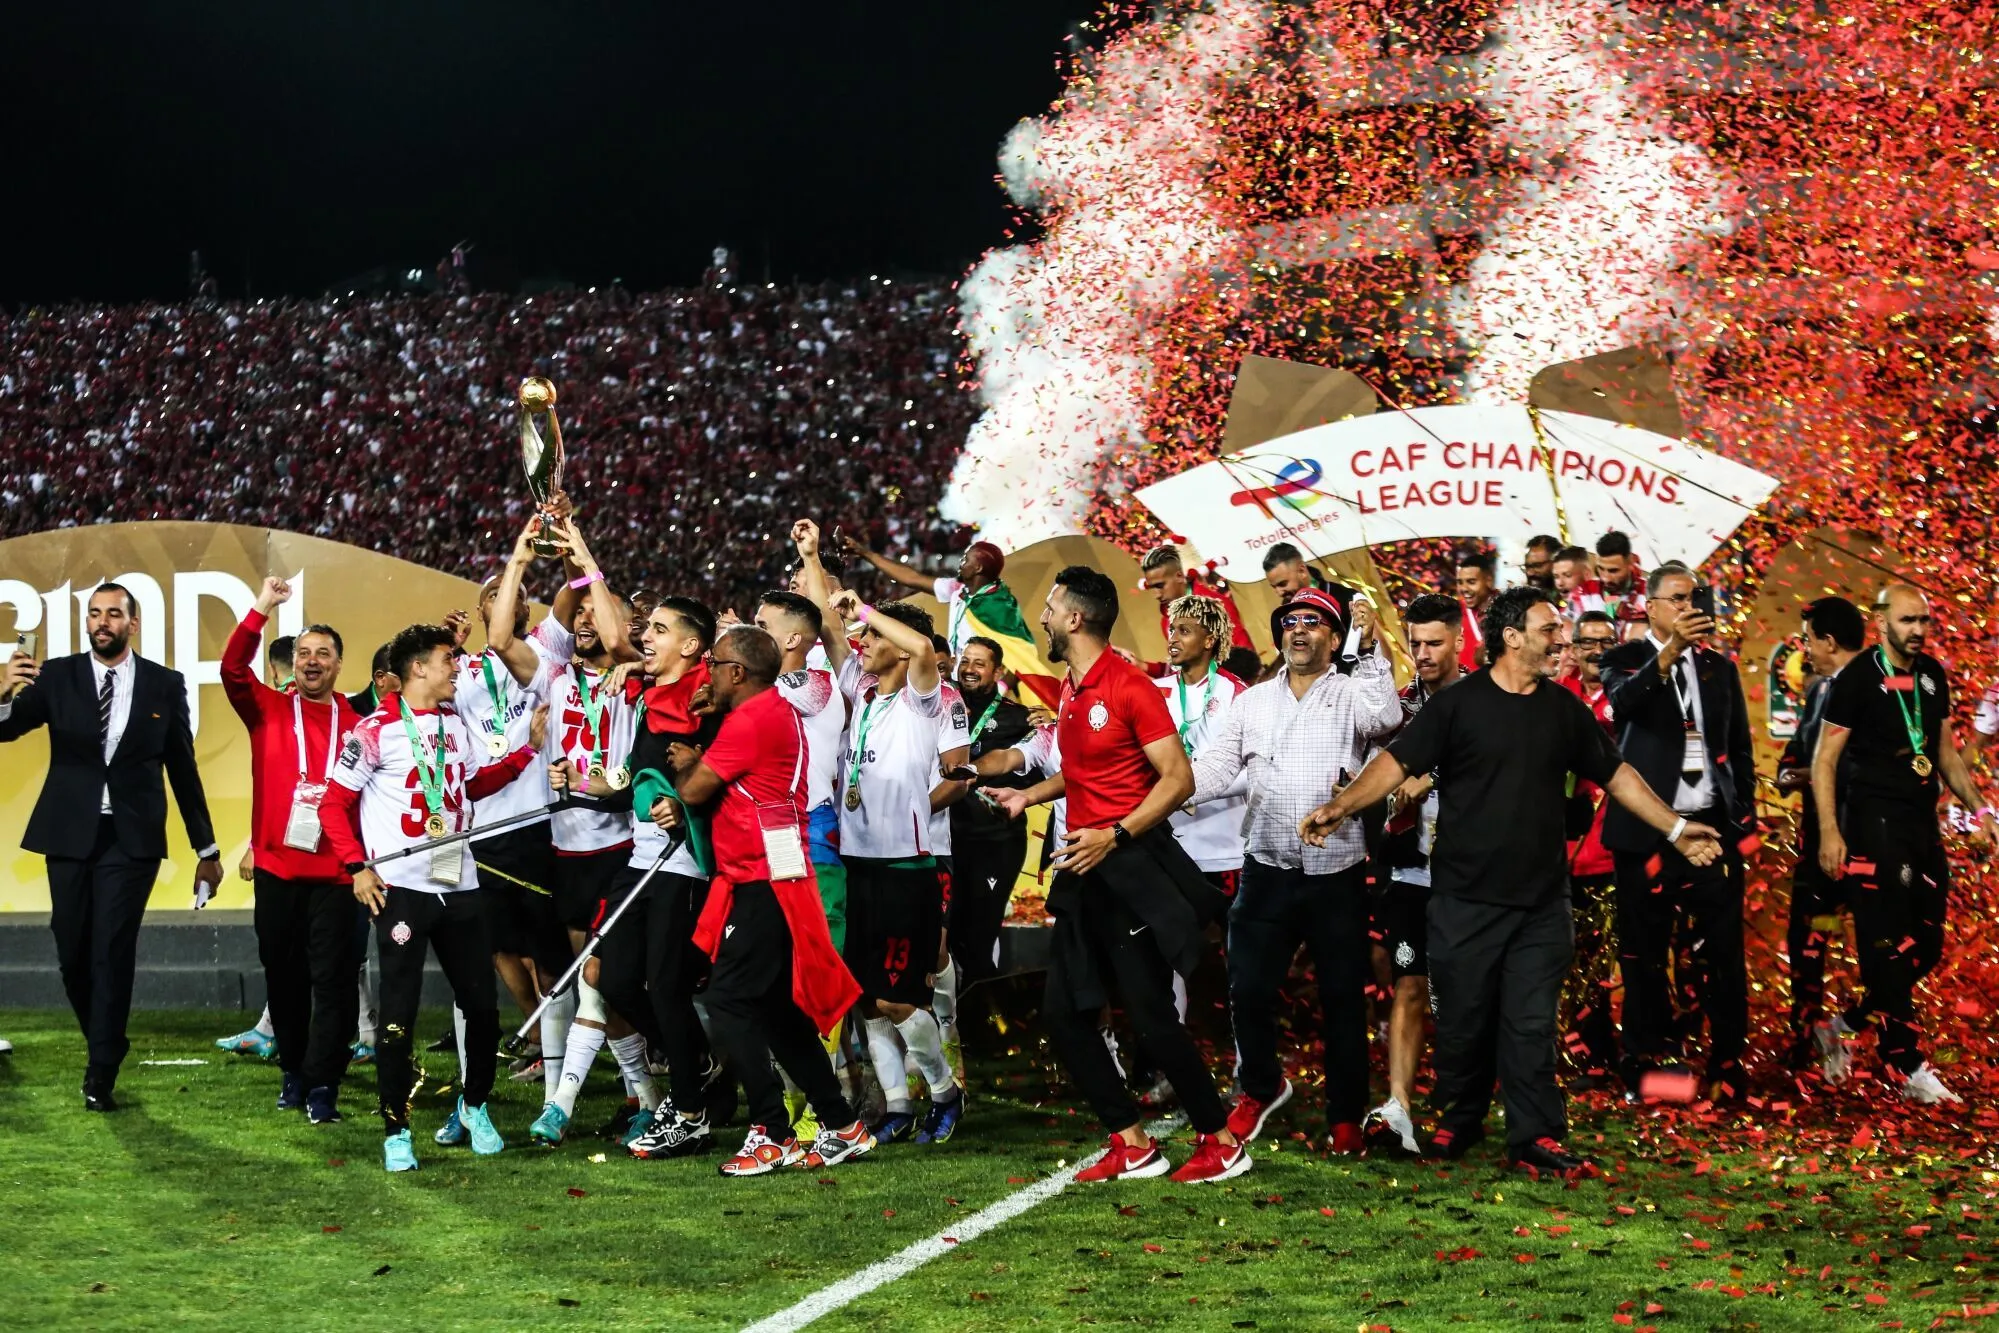 Wydad players celebrate winning the CAF Champions during the CAF Champions League 2021/22 Final between Al Ahly and Wydad Athletic Club held at the Mohamed V Stadium in Casablanca, Morocco on 30 May 2022 ©Weam Mostafa/Sports Inc - Photo by Icon sport